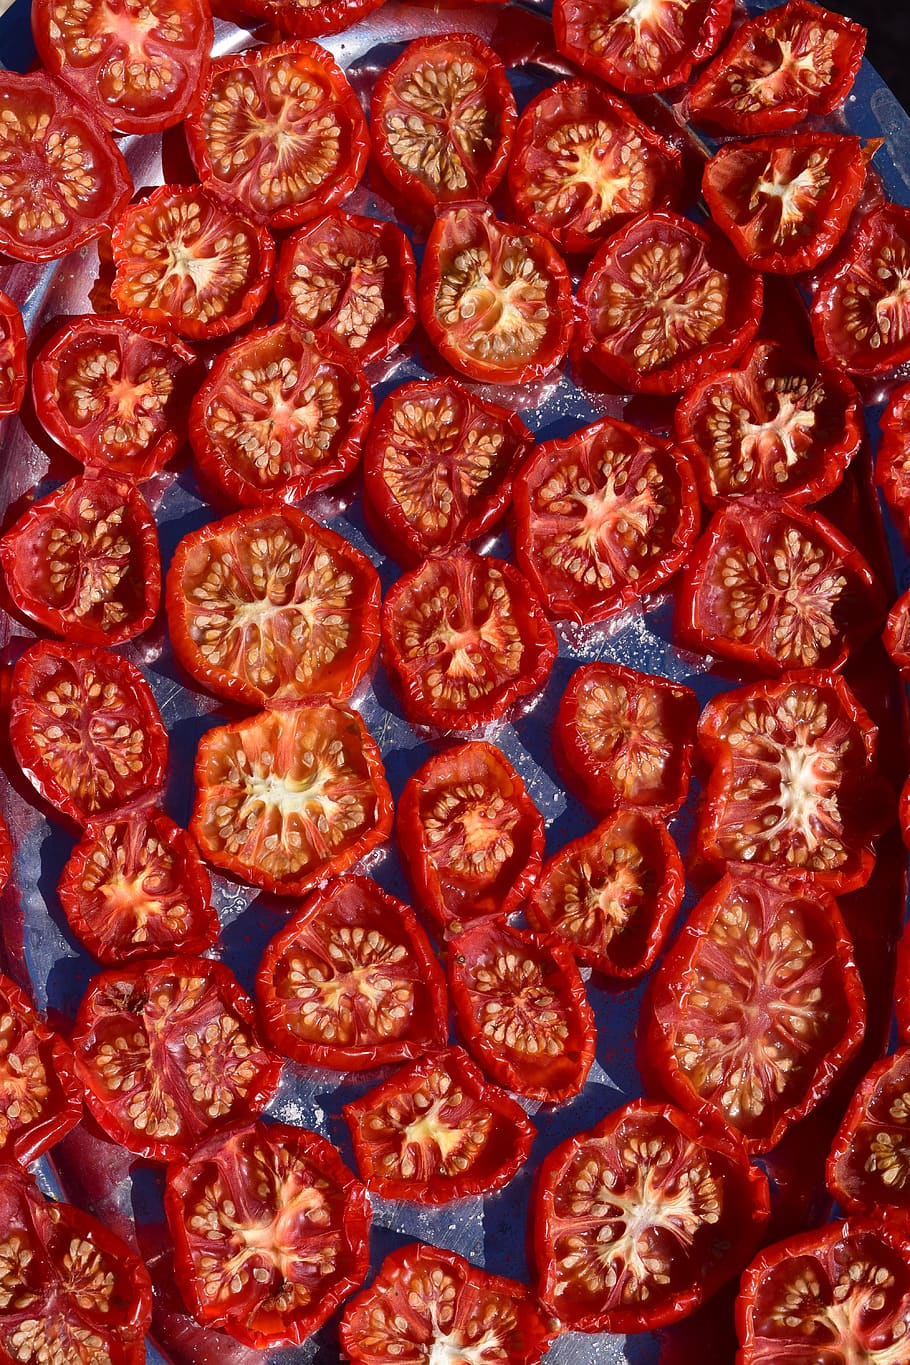 tomatoes, ripe tomatoes, ripe, red, vegetables, food, fresh, healthy, dry, sliced